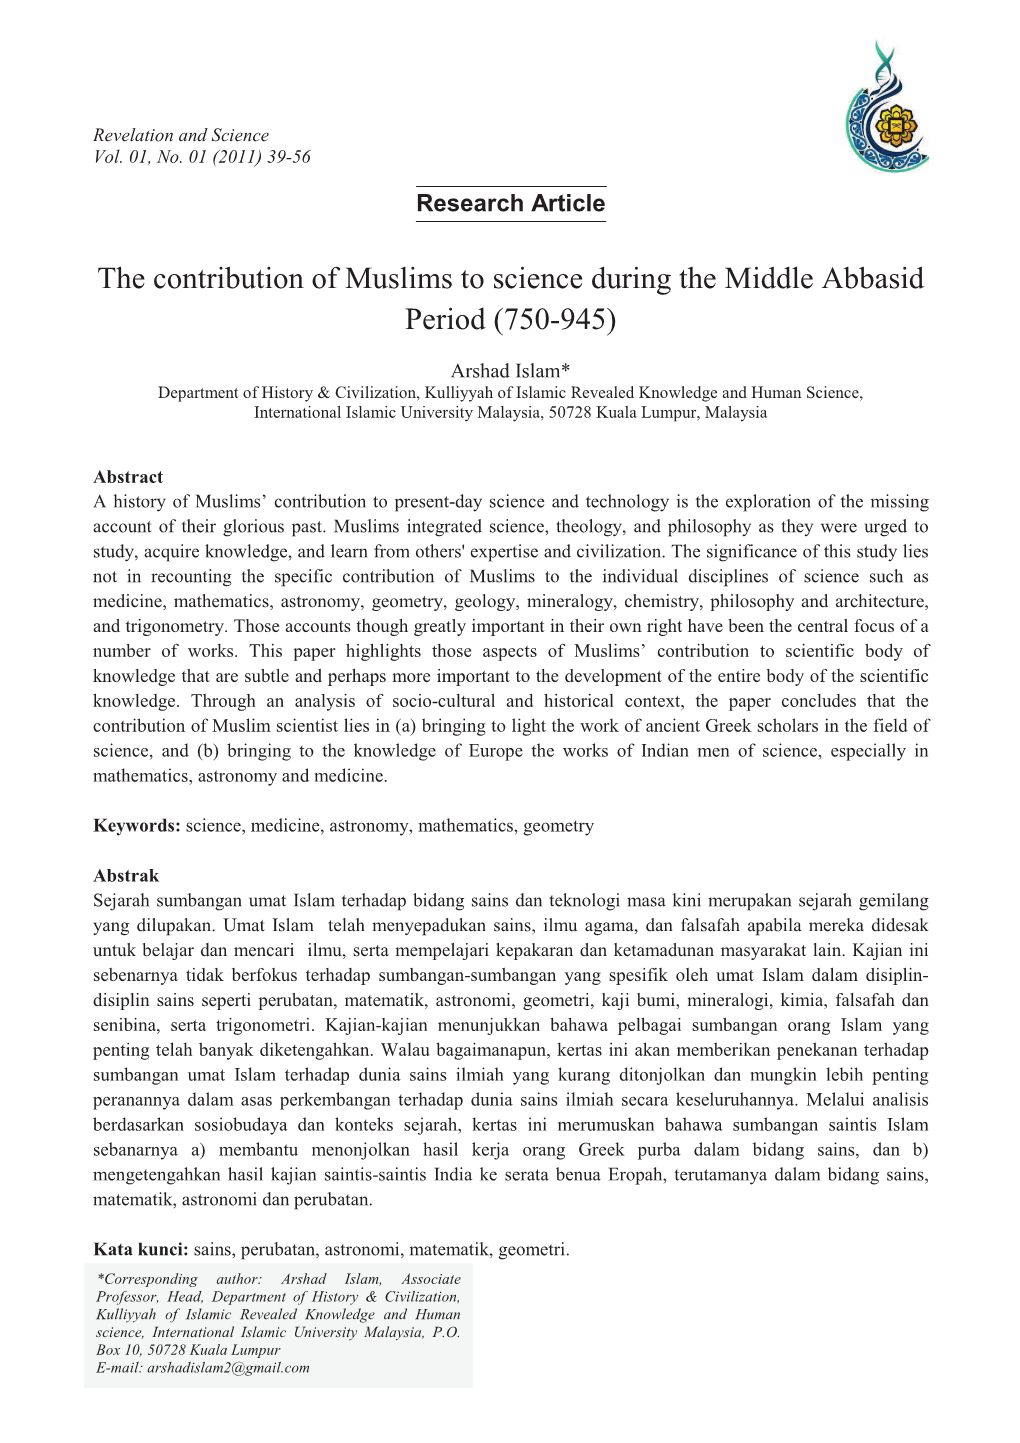 The Contribution of Muslims to Science During the Middle Abbasid Period (750-945)